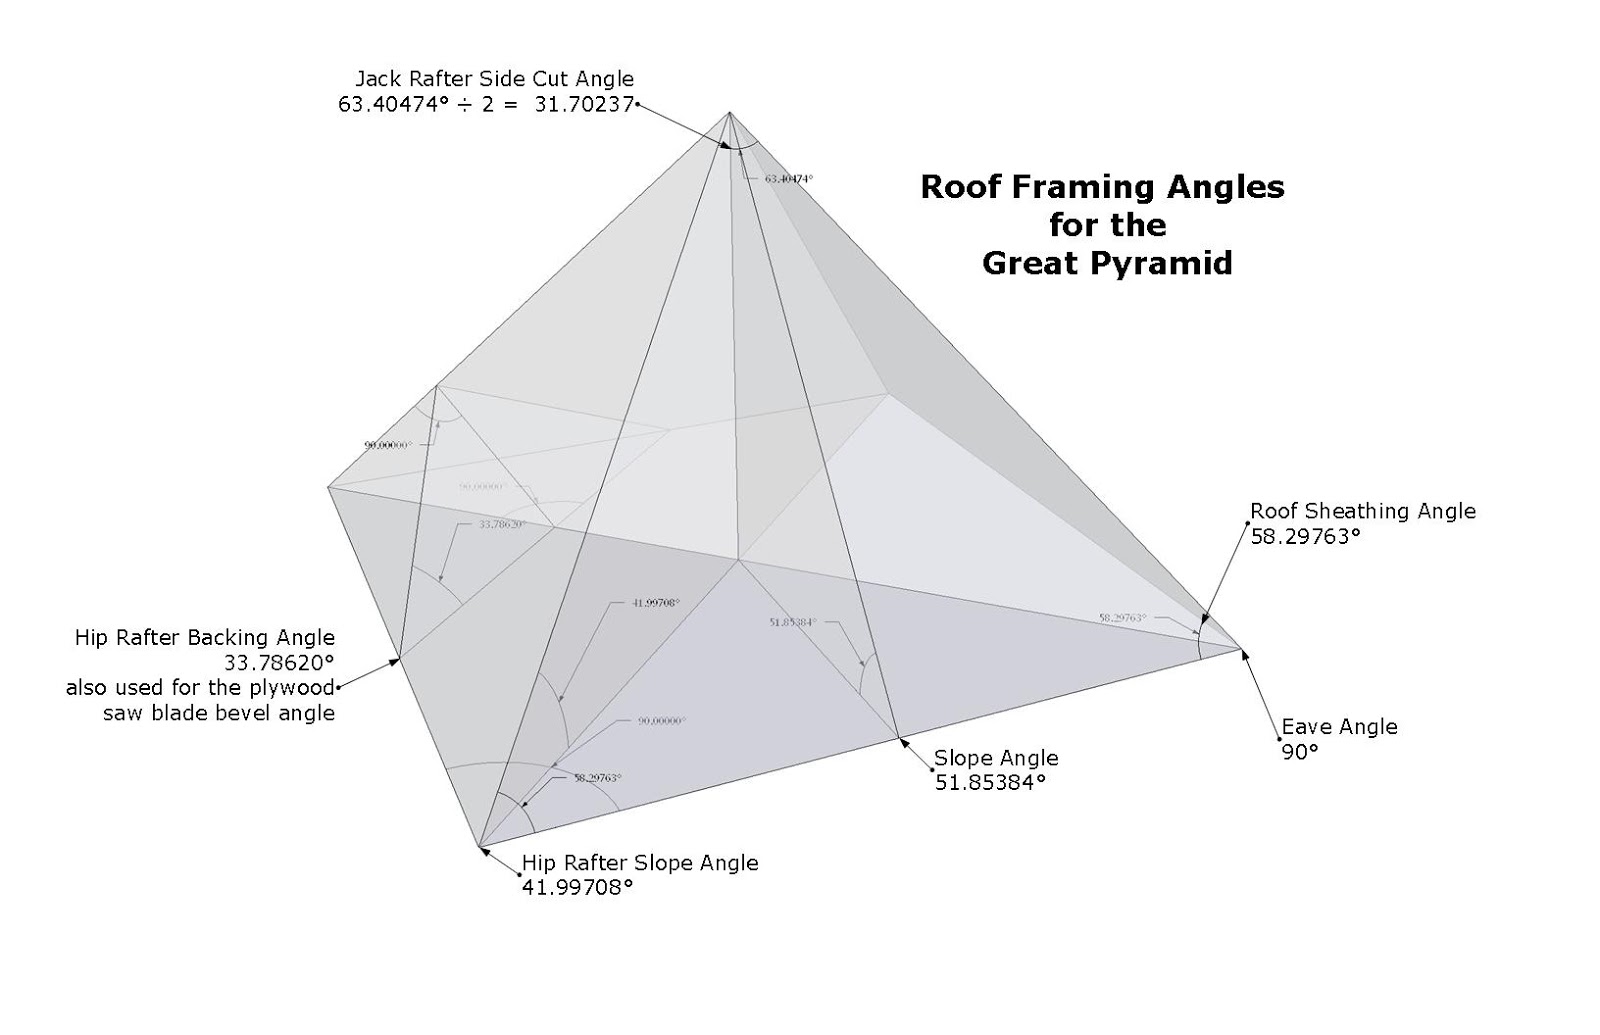 Back angle. Roof framing Geometry. Back slope Angle. Fence with slopping Overhang at 45 degree Angle.